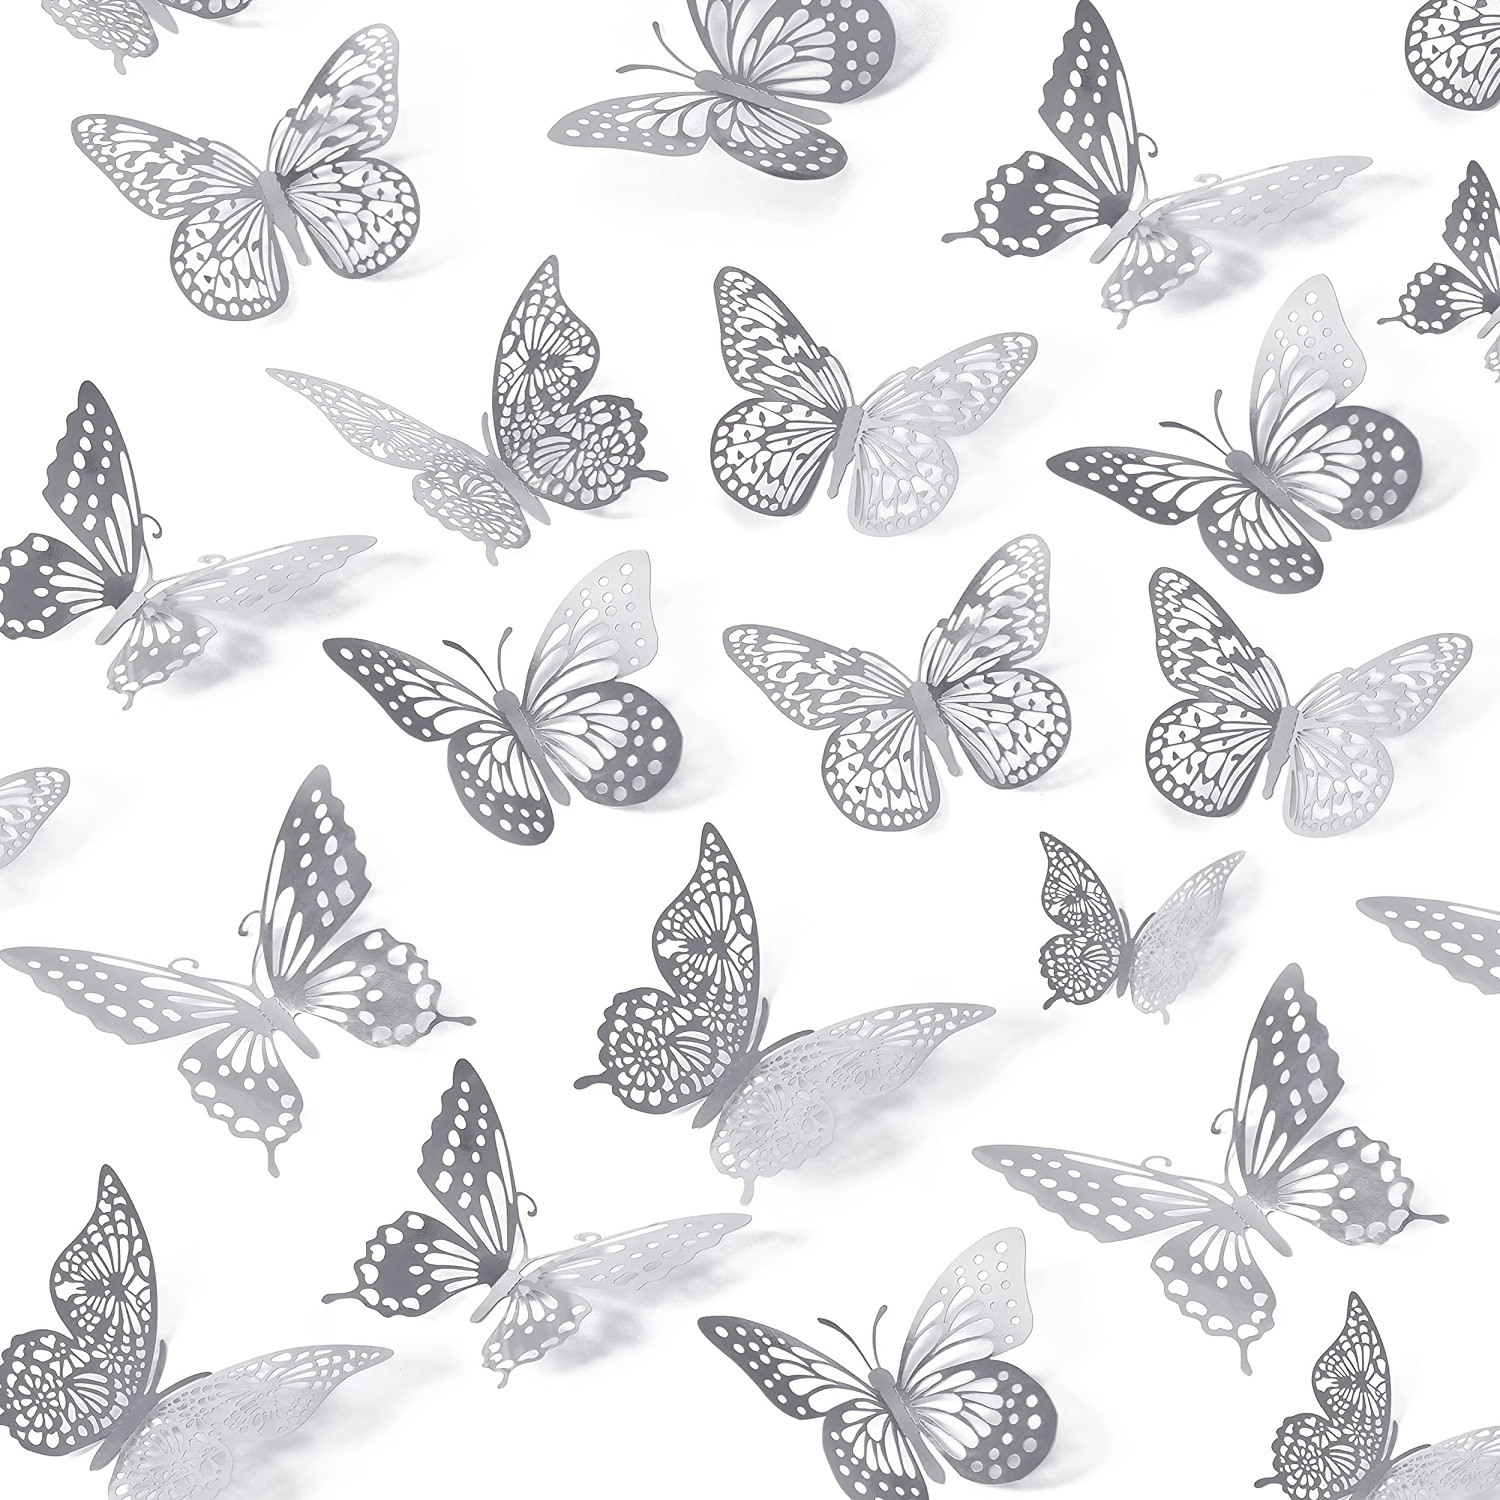 

12pcs, 3d Butterfly Wall Decor - Removable Metallic Stickers For Bedroom, Nursery, Classroom, Party, Wedding, Diy Gift (silver)